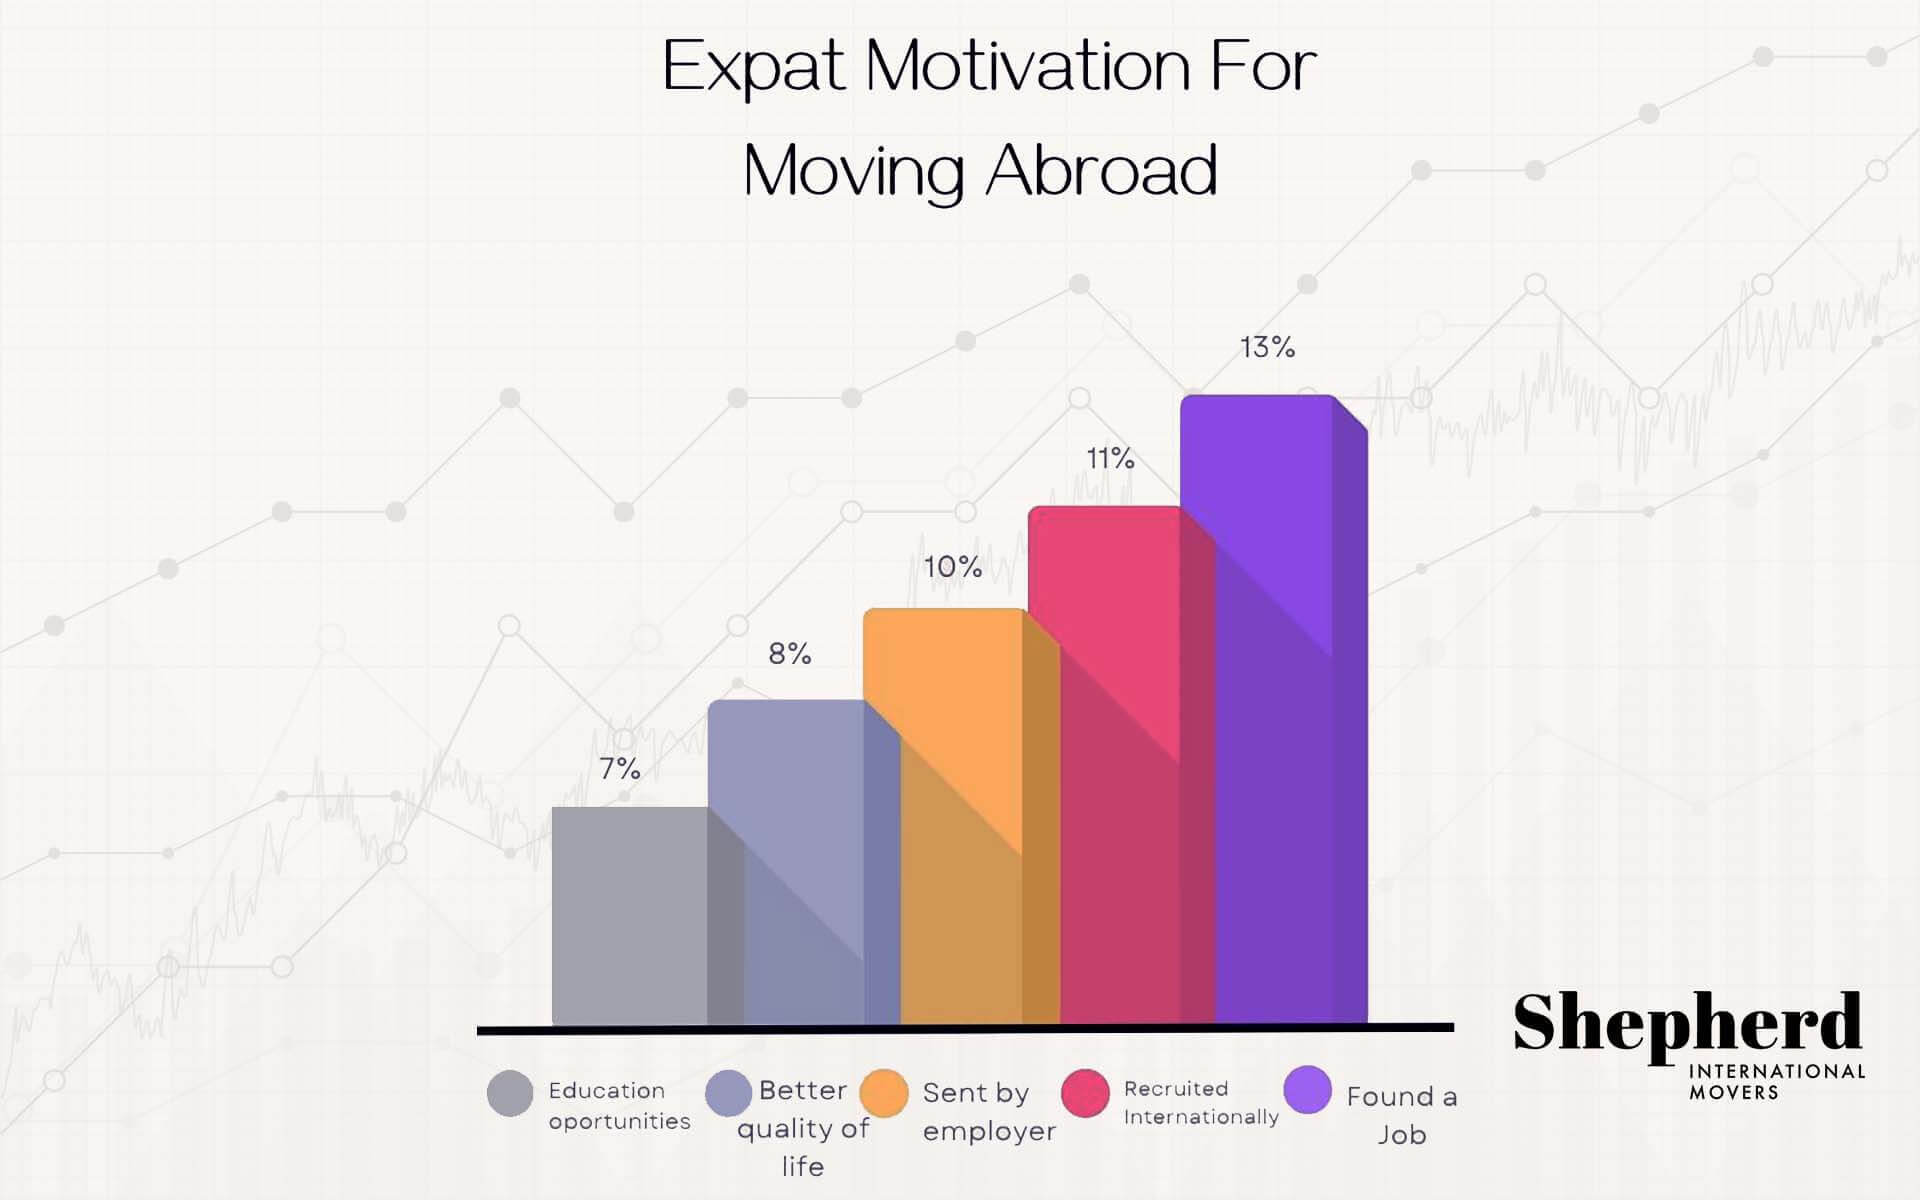 Expats Motivation For Moving Abroad